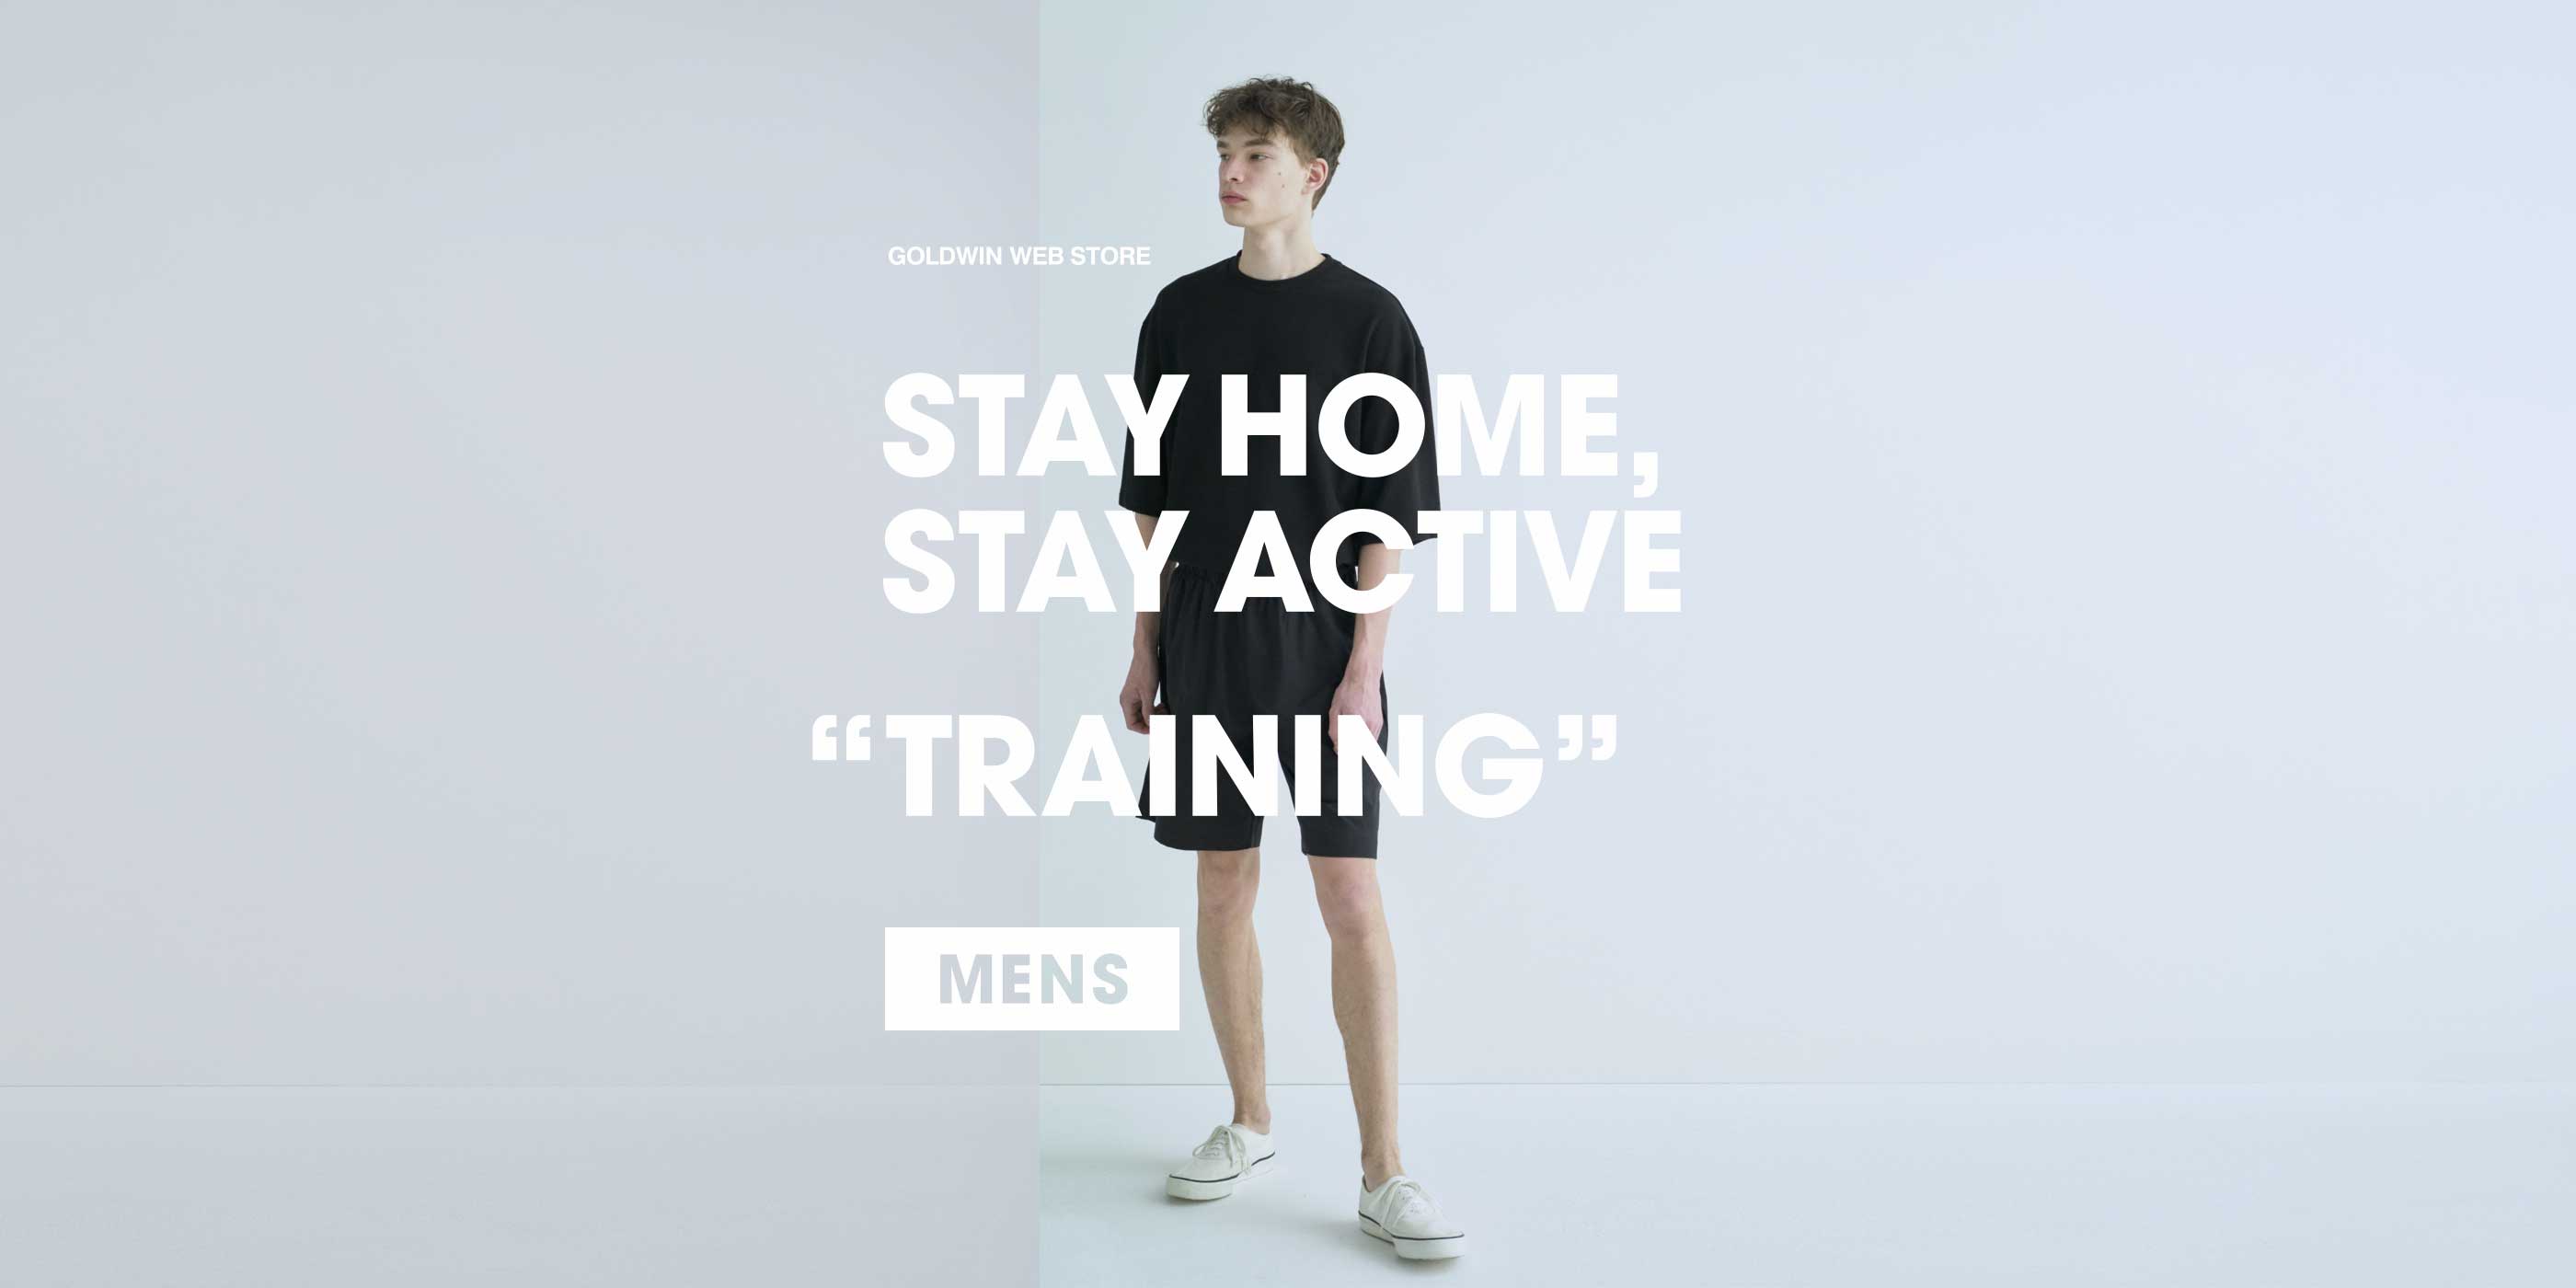 STAY HOME, STAY ACTIVE "TRAINING" MENS